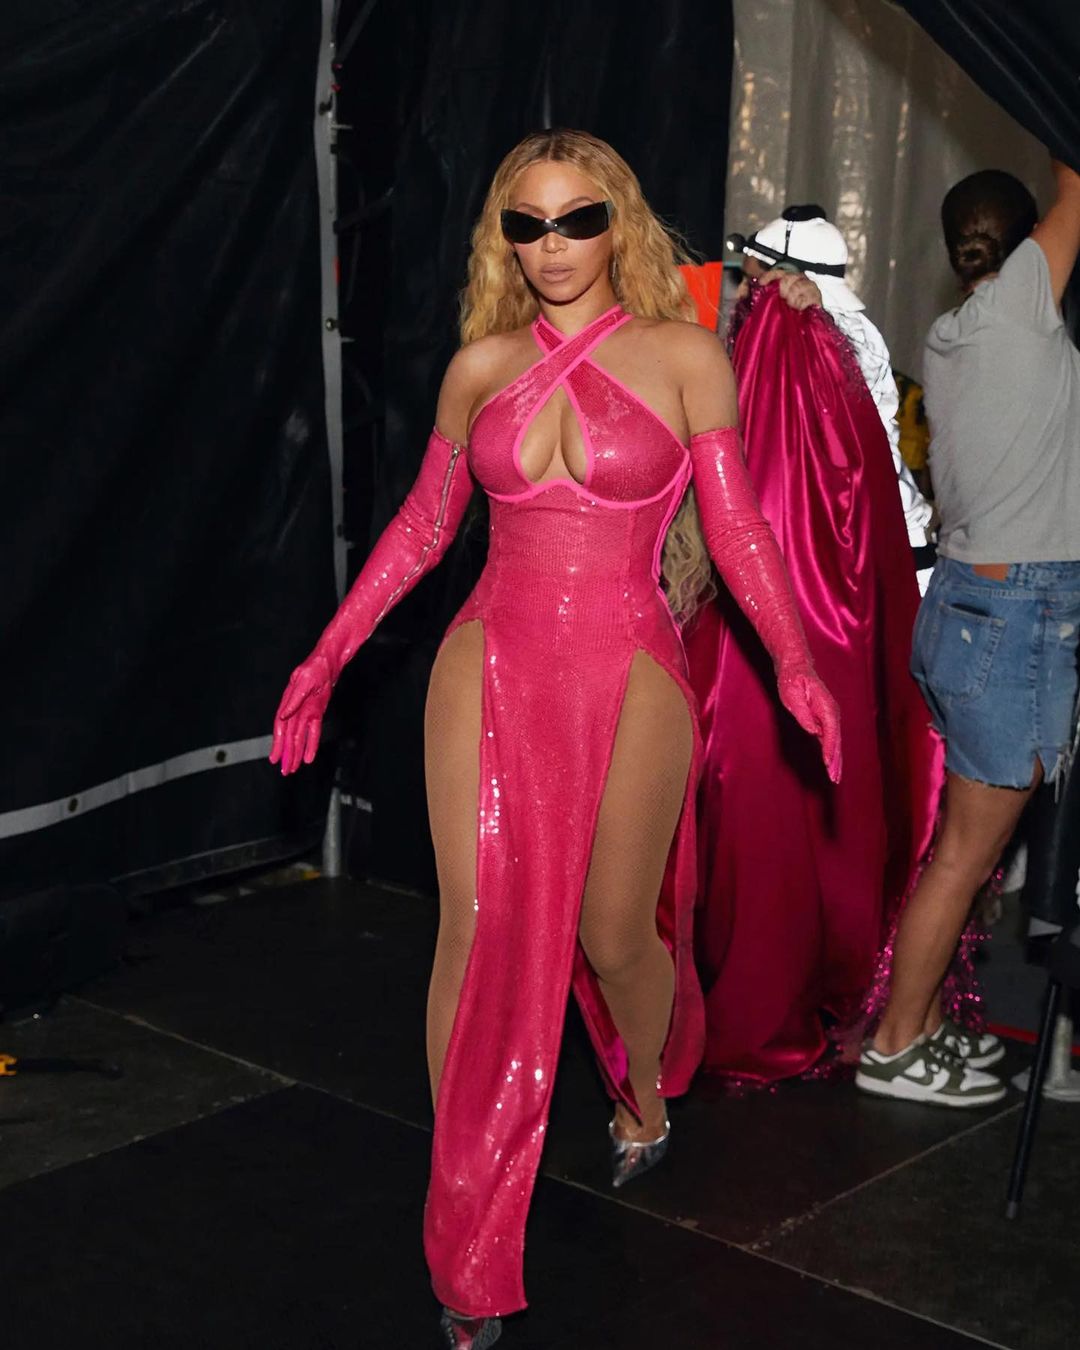 Beyoncé Revealed a Sparkly Hot Pink Ivy Park Dress While Performing in  Amsterdam – Fashion Bomb Daily